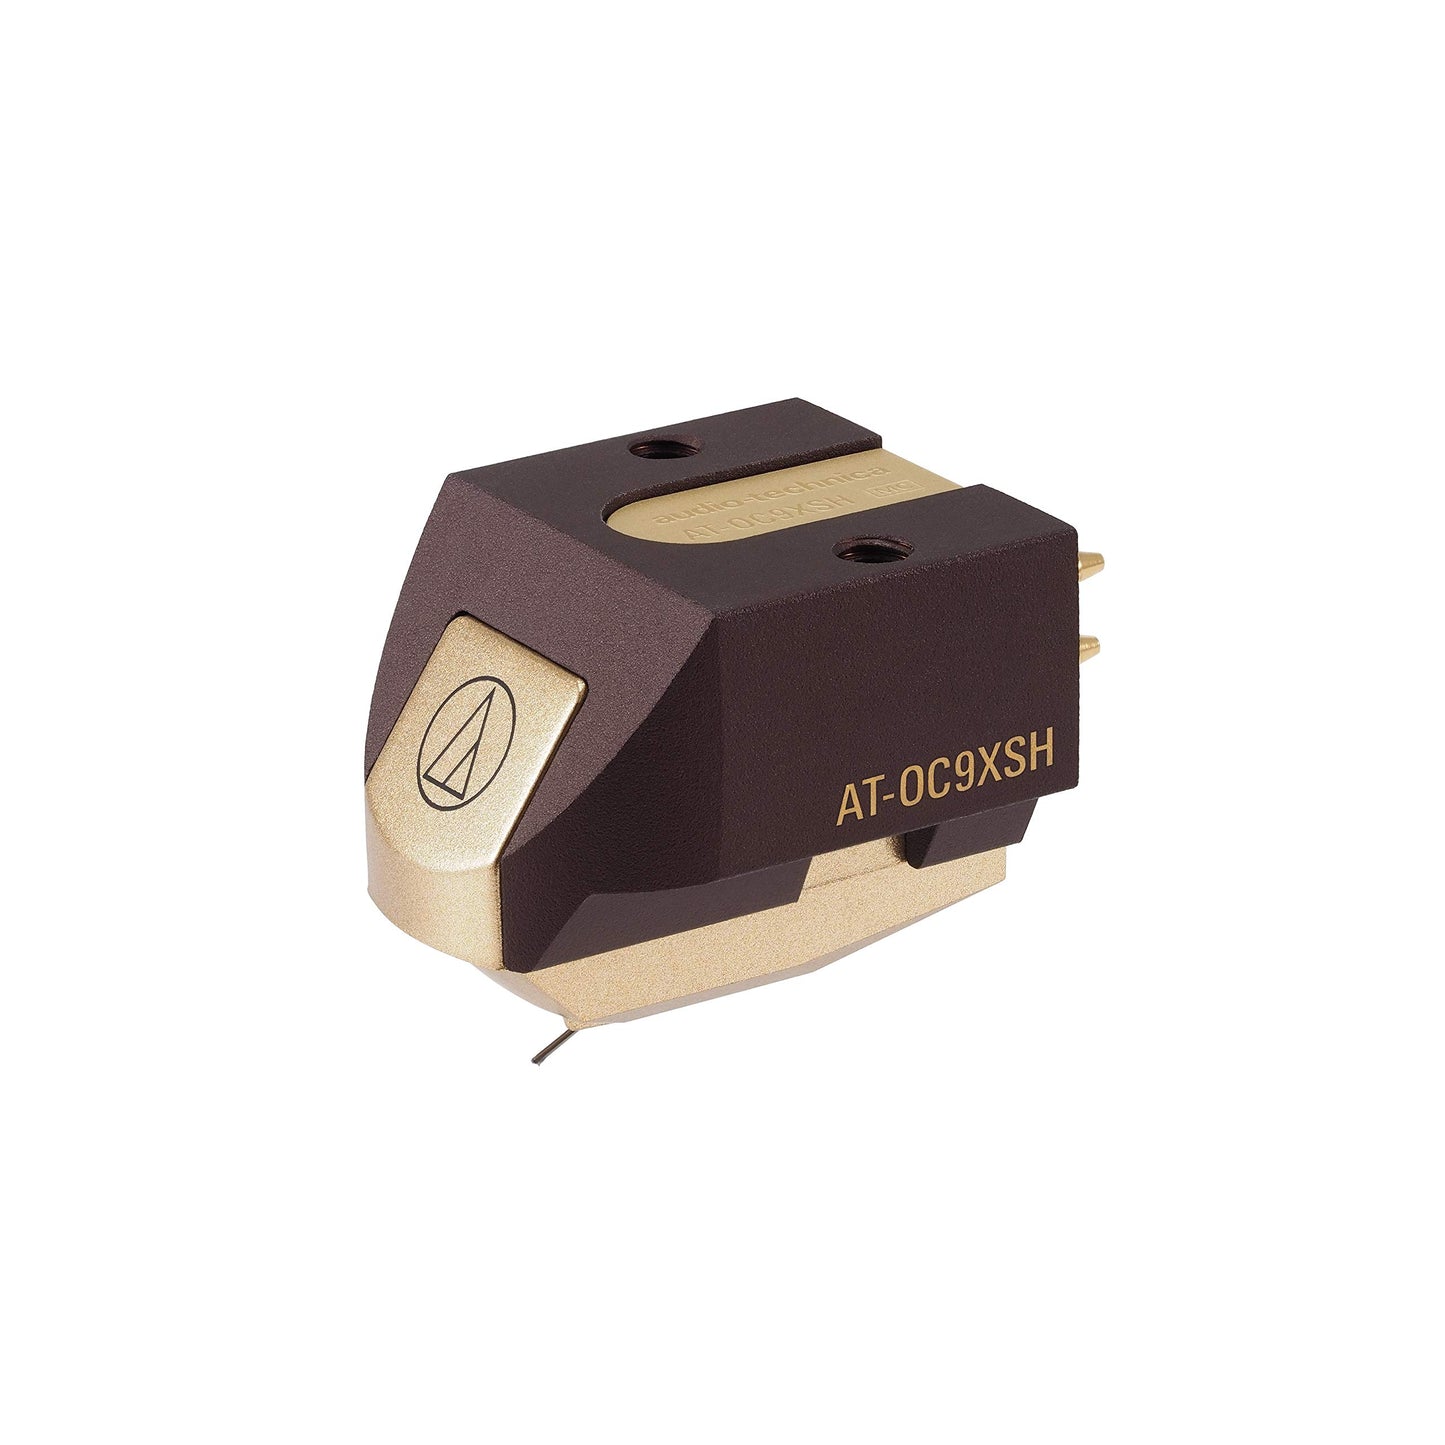 Audio-Technica AT-OC9XSH Dual Moving Coil Cartridge with Shibata Stylus